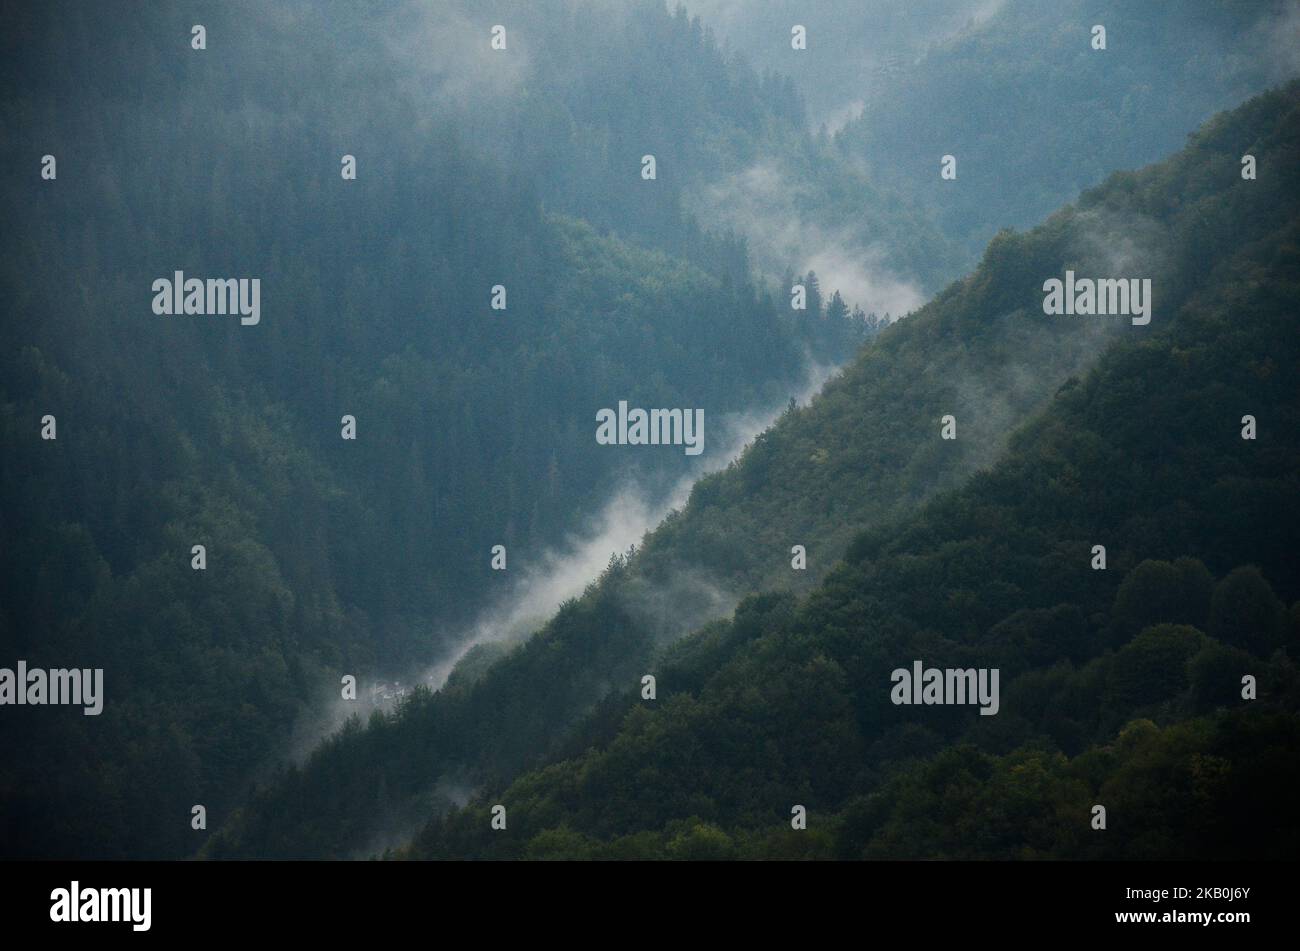 Mist lift above the Rhodope mountains near the Orlovo oko famous viewpoint, near the village of Yagodina, Bulgaria on August 27, 2018. Orlovo oko (Eagle's eye) is a sightseeing platform built at 1563 m above the sea level, next to the St.Ilia peak in the Rhodope mountains and close to the village of Yagodina and the famous Yagodina cave, Bulgaria on August 29, 2018 (Photo by Hristo Rusev/NurPhoto) Stock Photo